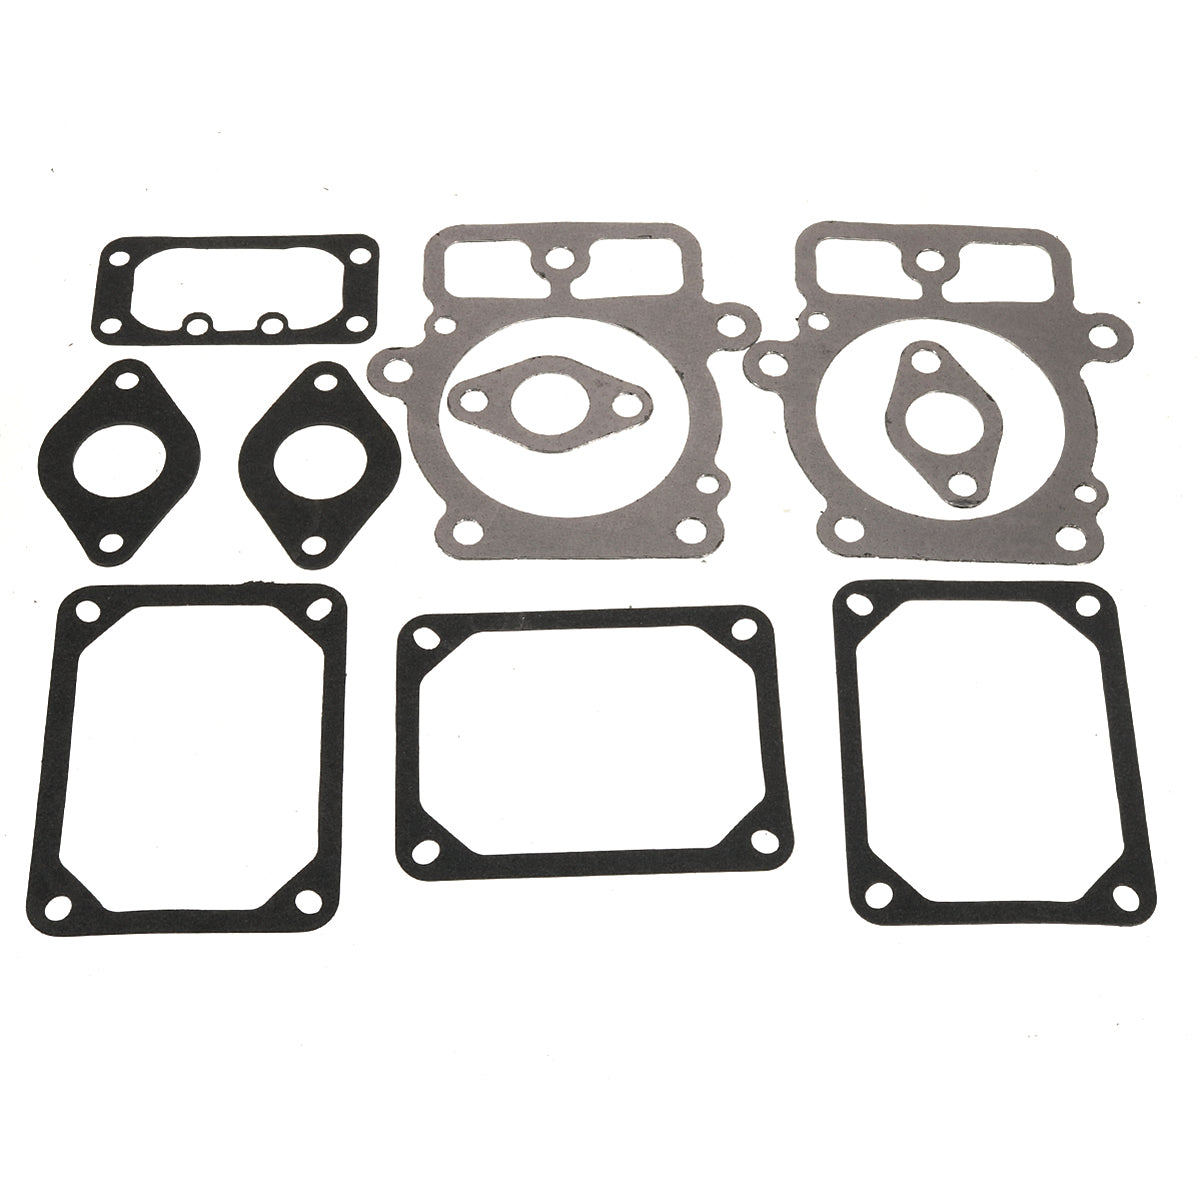 Slate Gray 12 PCS Lawn Mower Valve Gasket Set For Briggs & Stratton 694013 Replaces# 499890